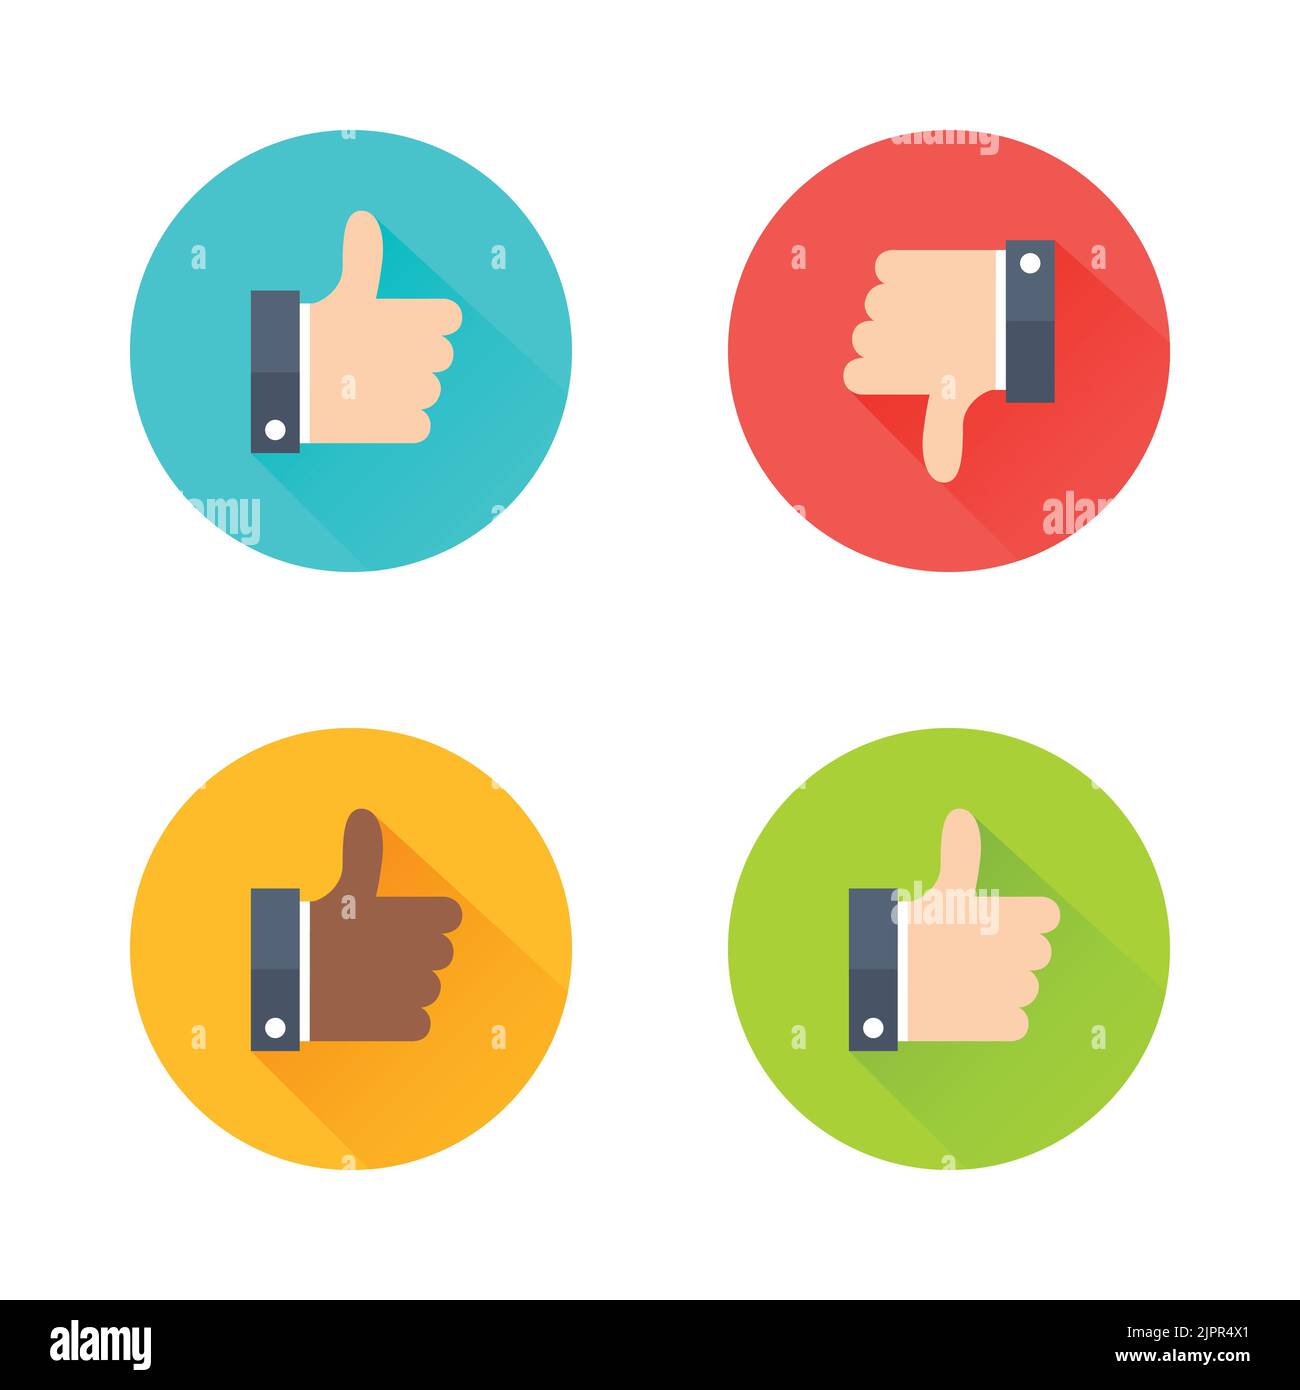 Like, dislike flat style icon set. Thumb up and down icons in cartoon style. Colorful approve buttons. Vector elements Stock Vector